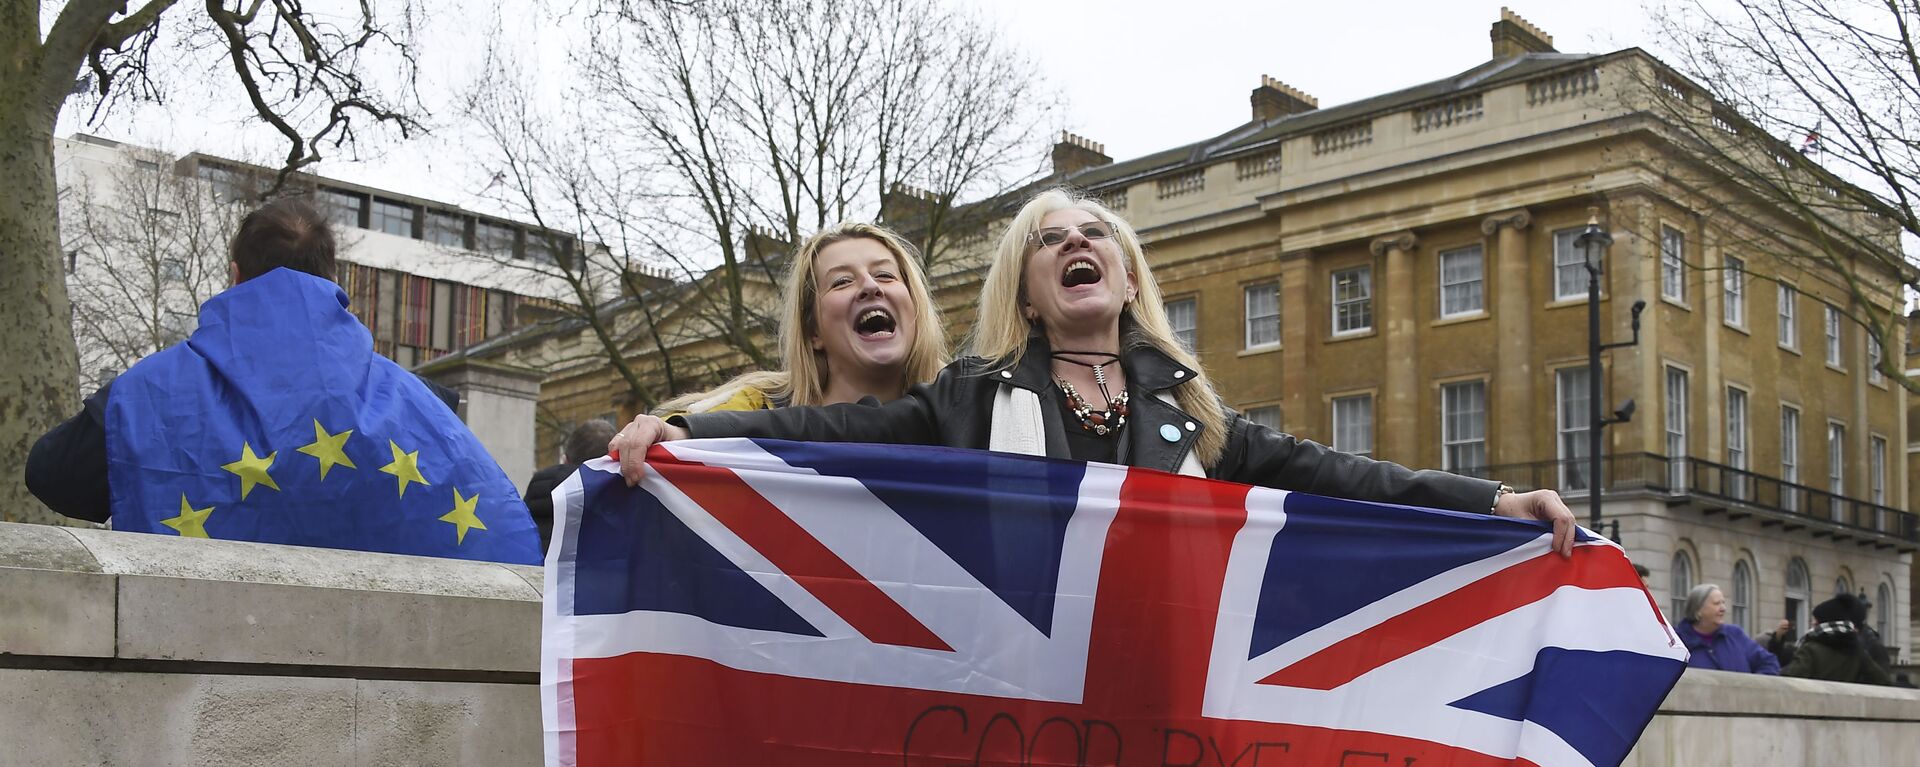 Brexit supporters hold the Union Jack with a text reading Goodbye EU as they celebrate next to a person wearing the EU flag in London, Friday, Jan. 31, 2020 - Sputnik International, 1920, 15.03.2021